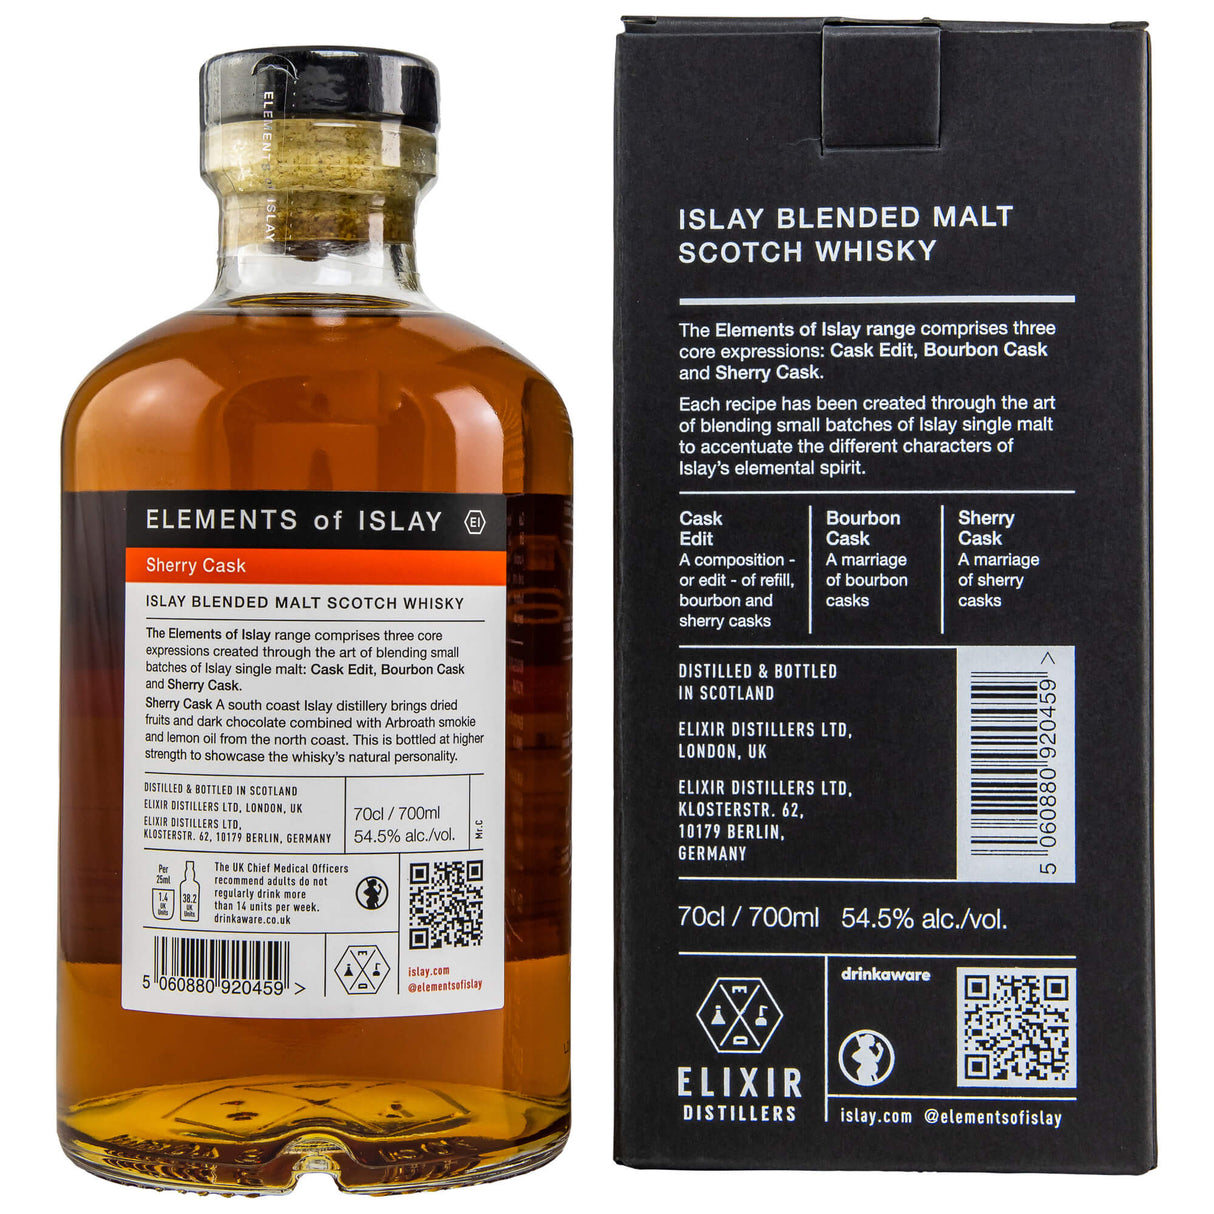 Elements of Islay Sherry Cask Whisky